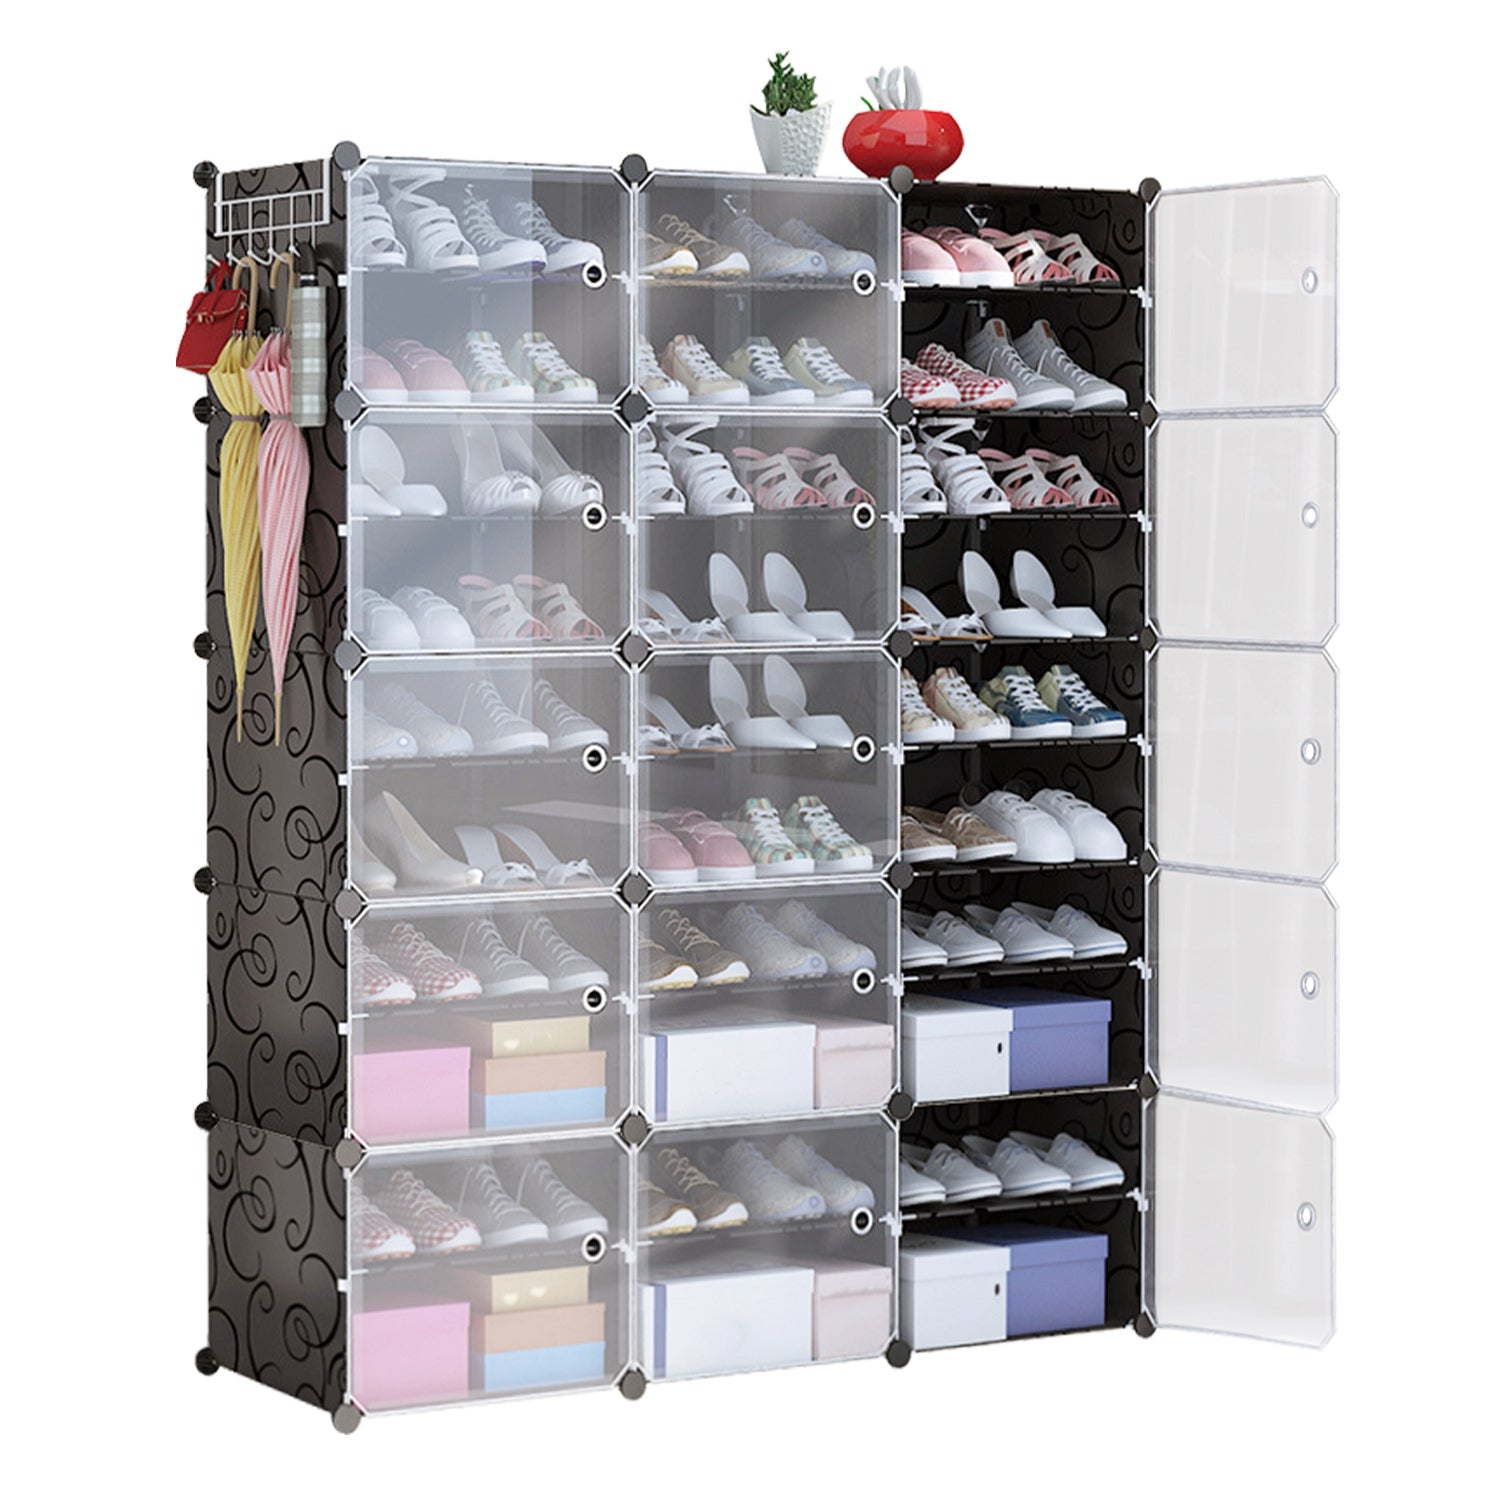 title:10-Tier 3-Row Shoe Rack Organizer Stackable Free Standing Shoe Storage Shelf Plastic Shoe Cabinet Tower with Transparent Doors for Heels Boots Slipper;color:Black